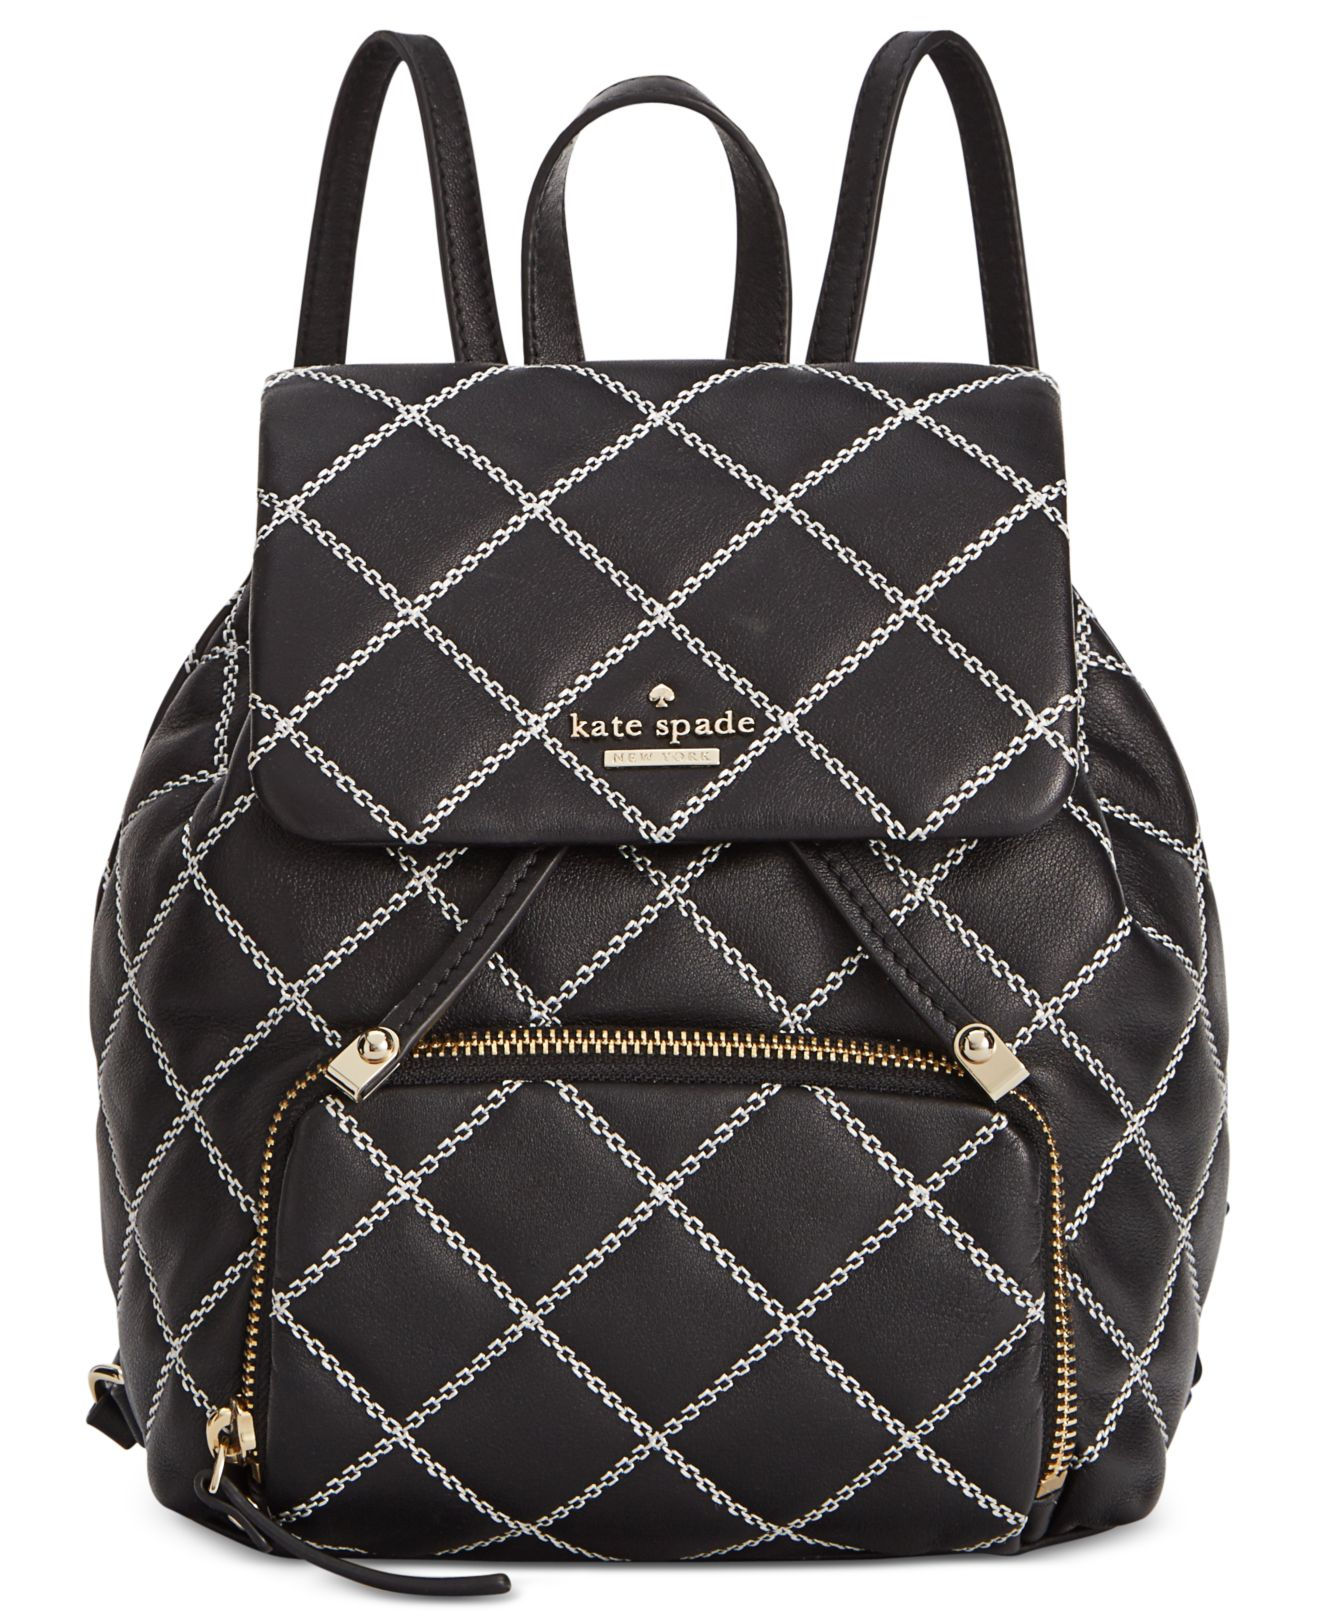 Kate spade Emerson Place Jessa Mini Backpack in Black (Black/Cement) | Lyst